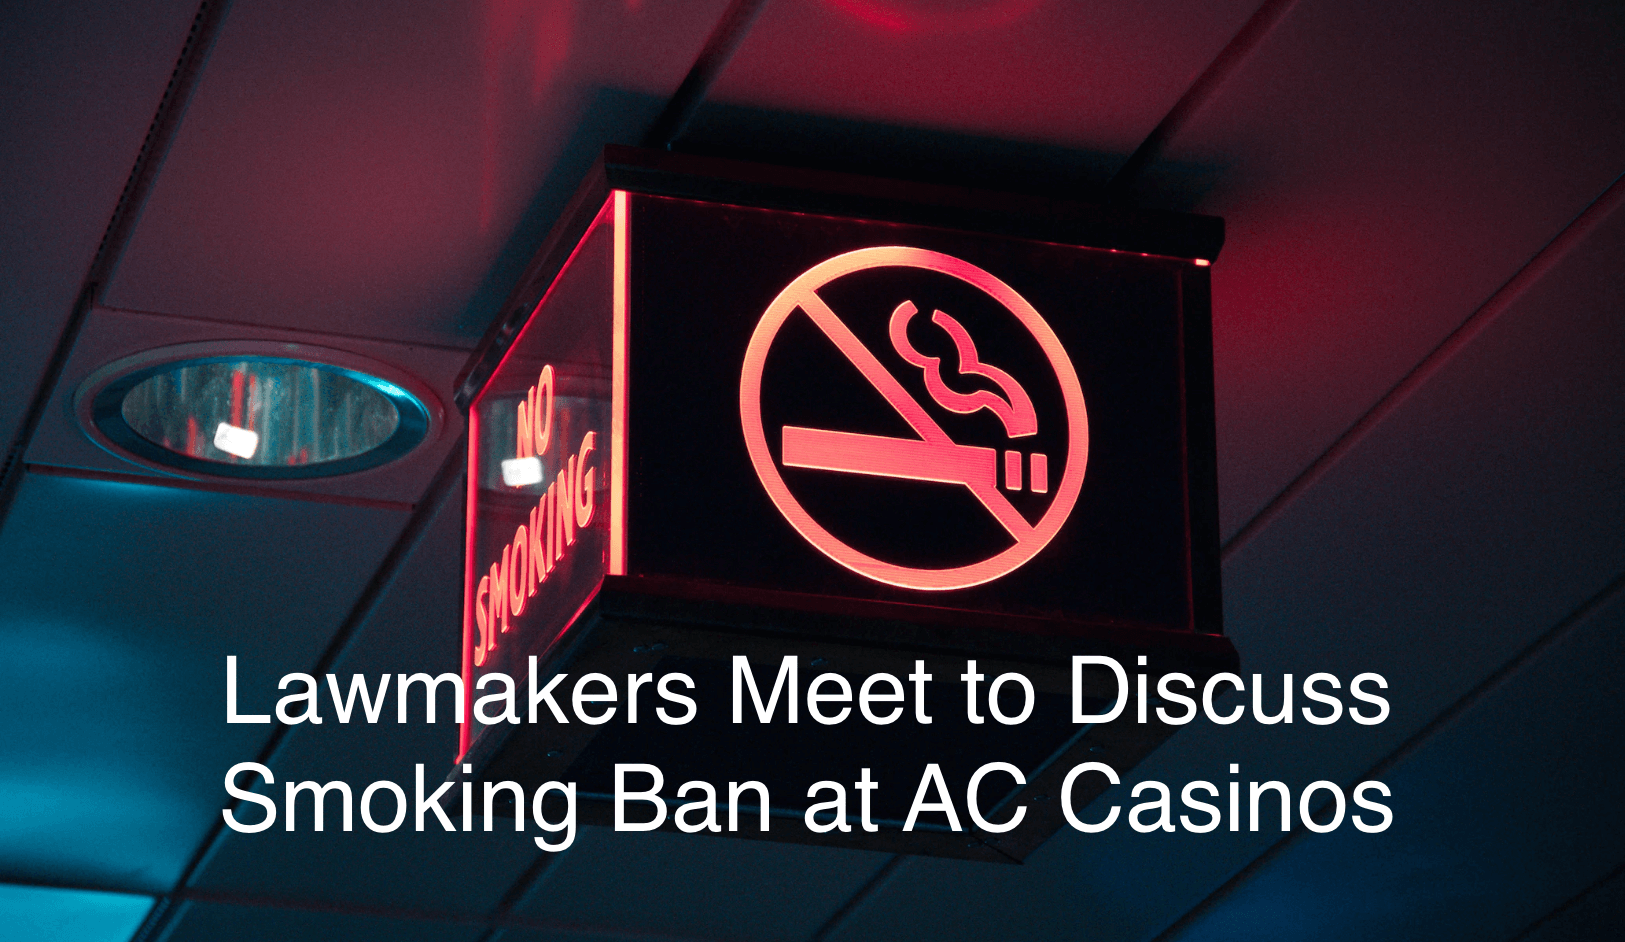 Lawmakers Meeting to Discuss “Smoking Loophole” at Atlantic City Casinos